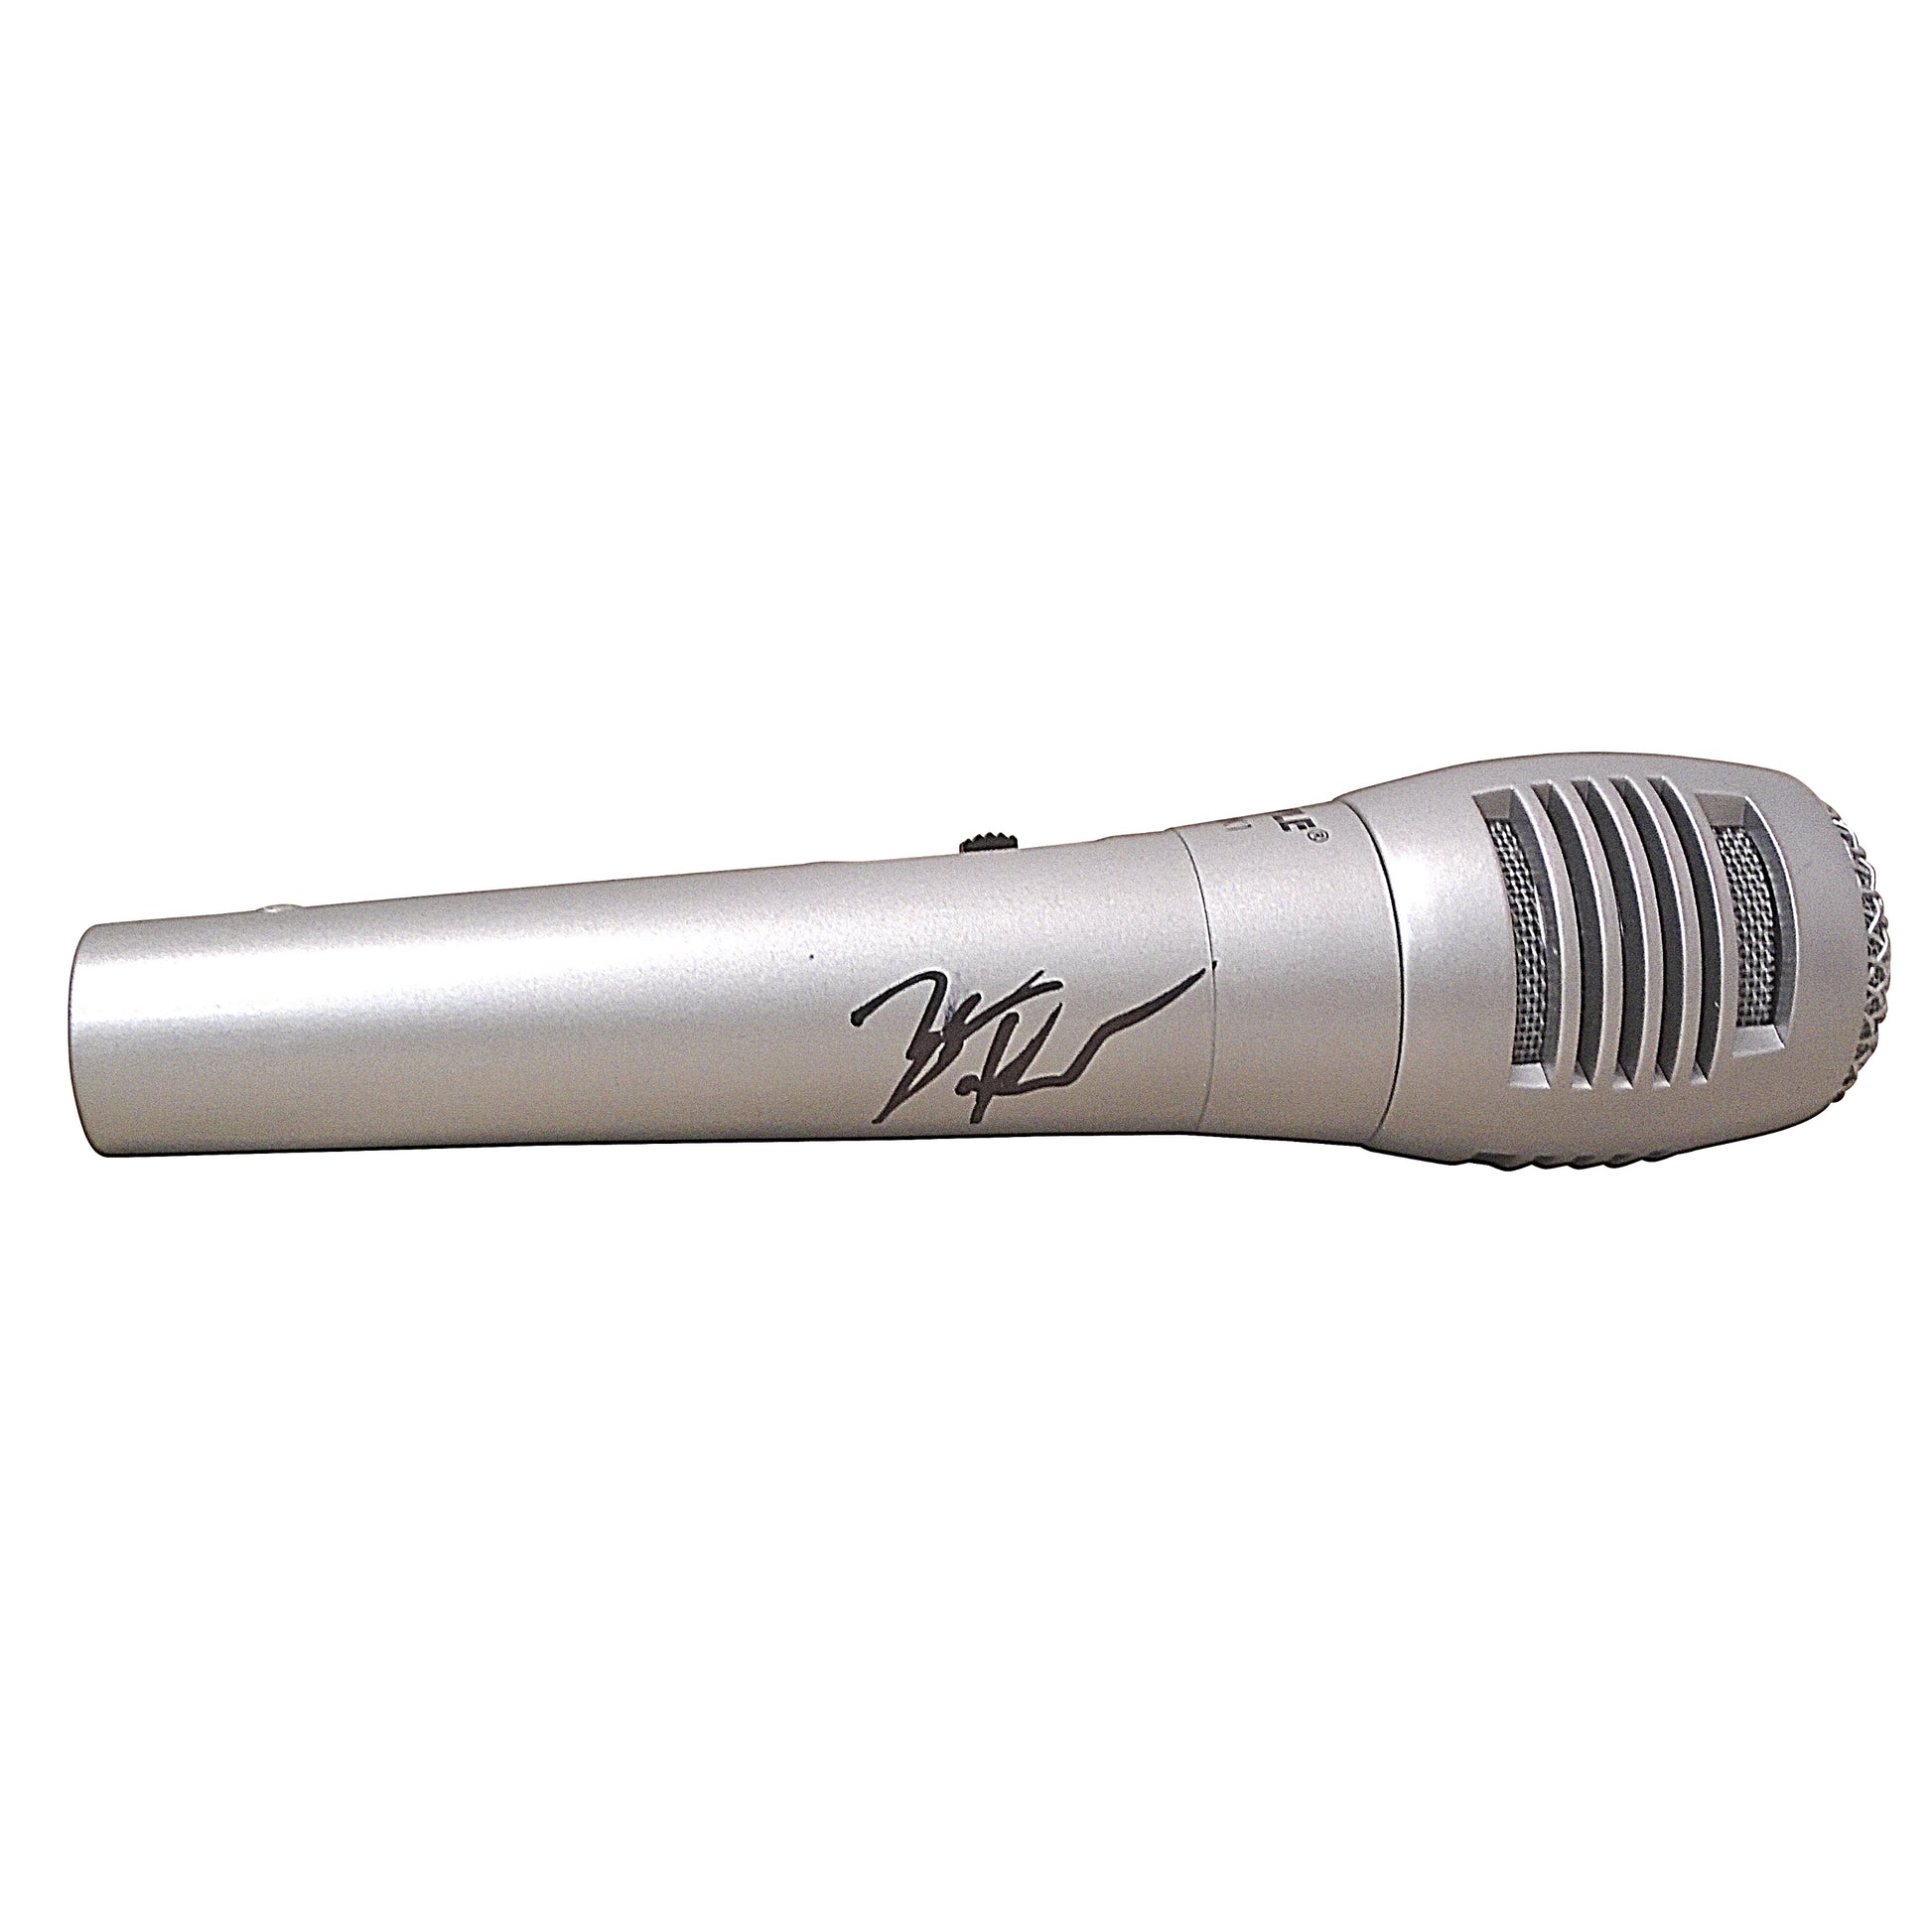 Music- Autographed- A Thousand Horses Signed Pyle Microphone Beckett BAS Authenticated 105